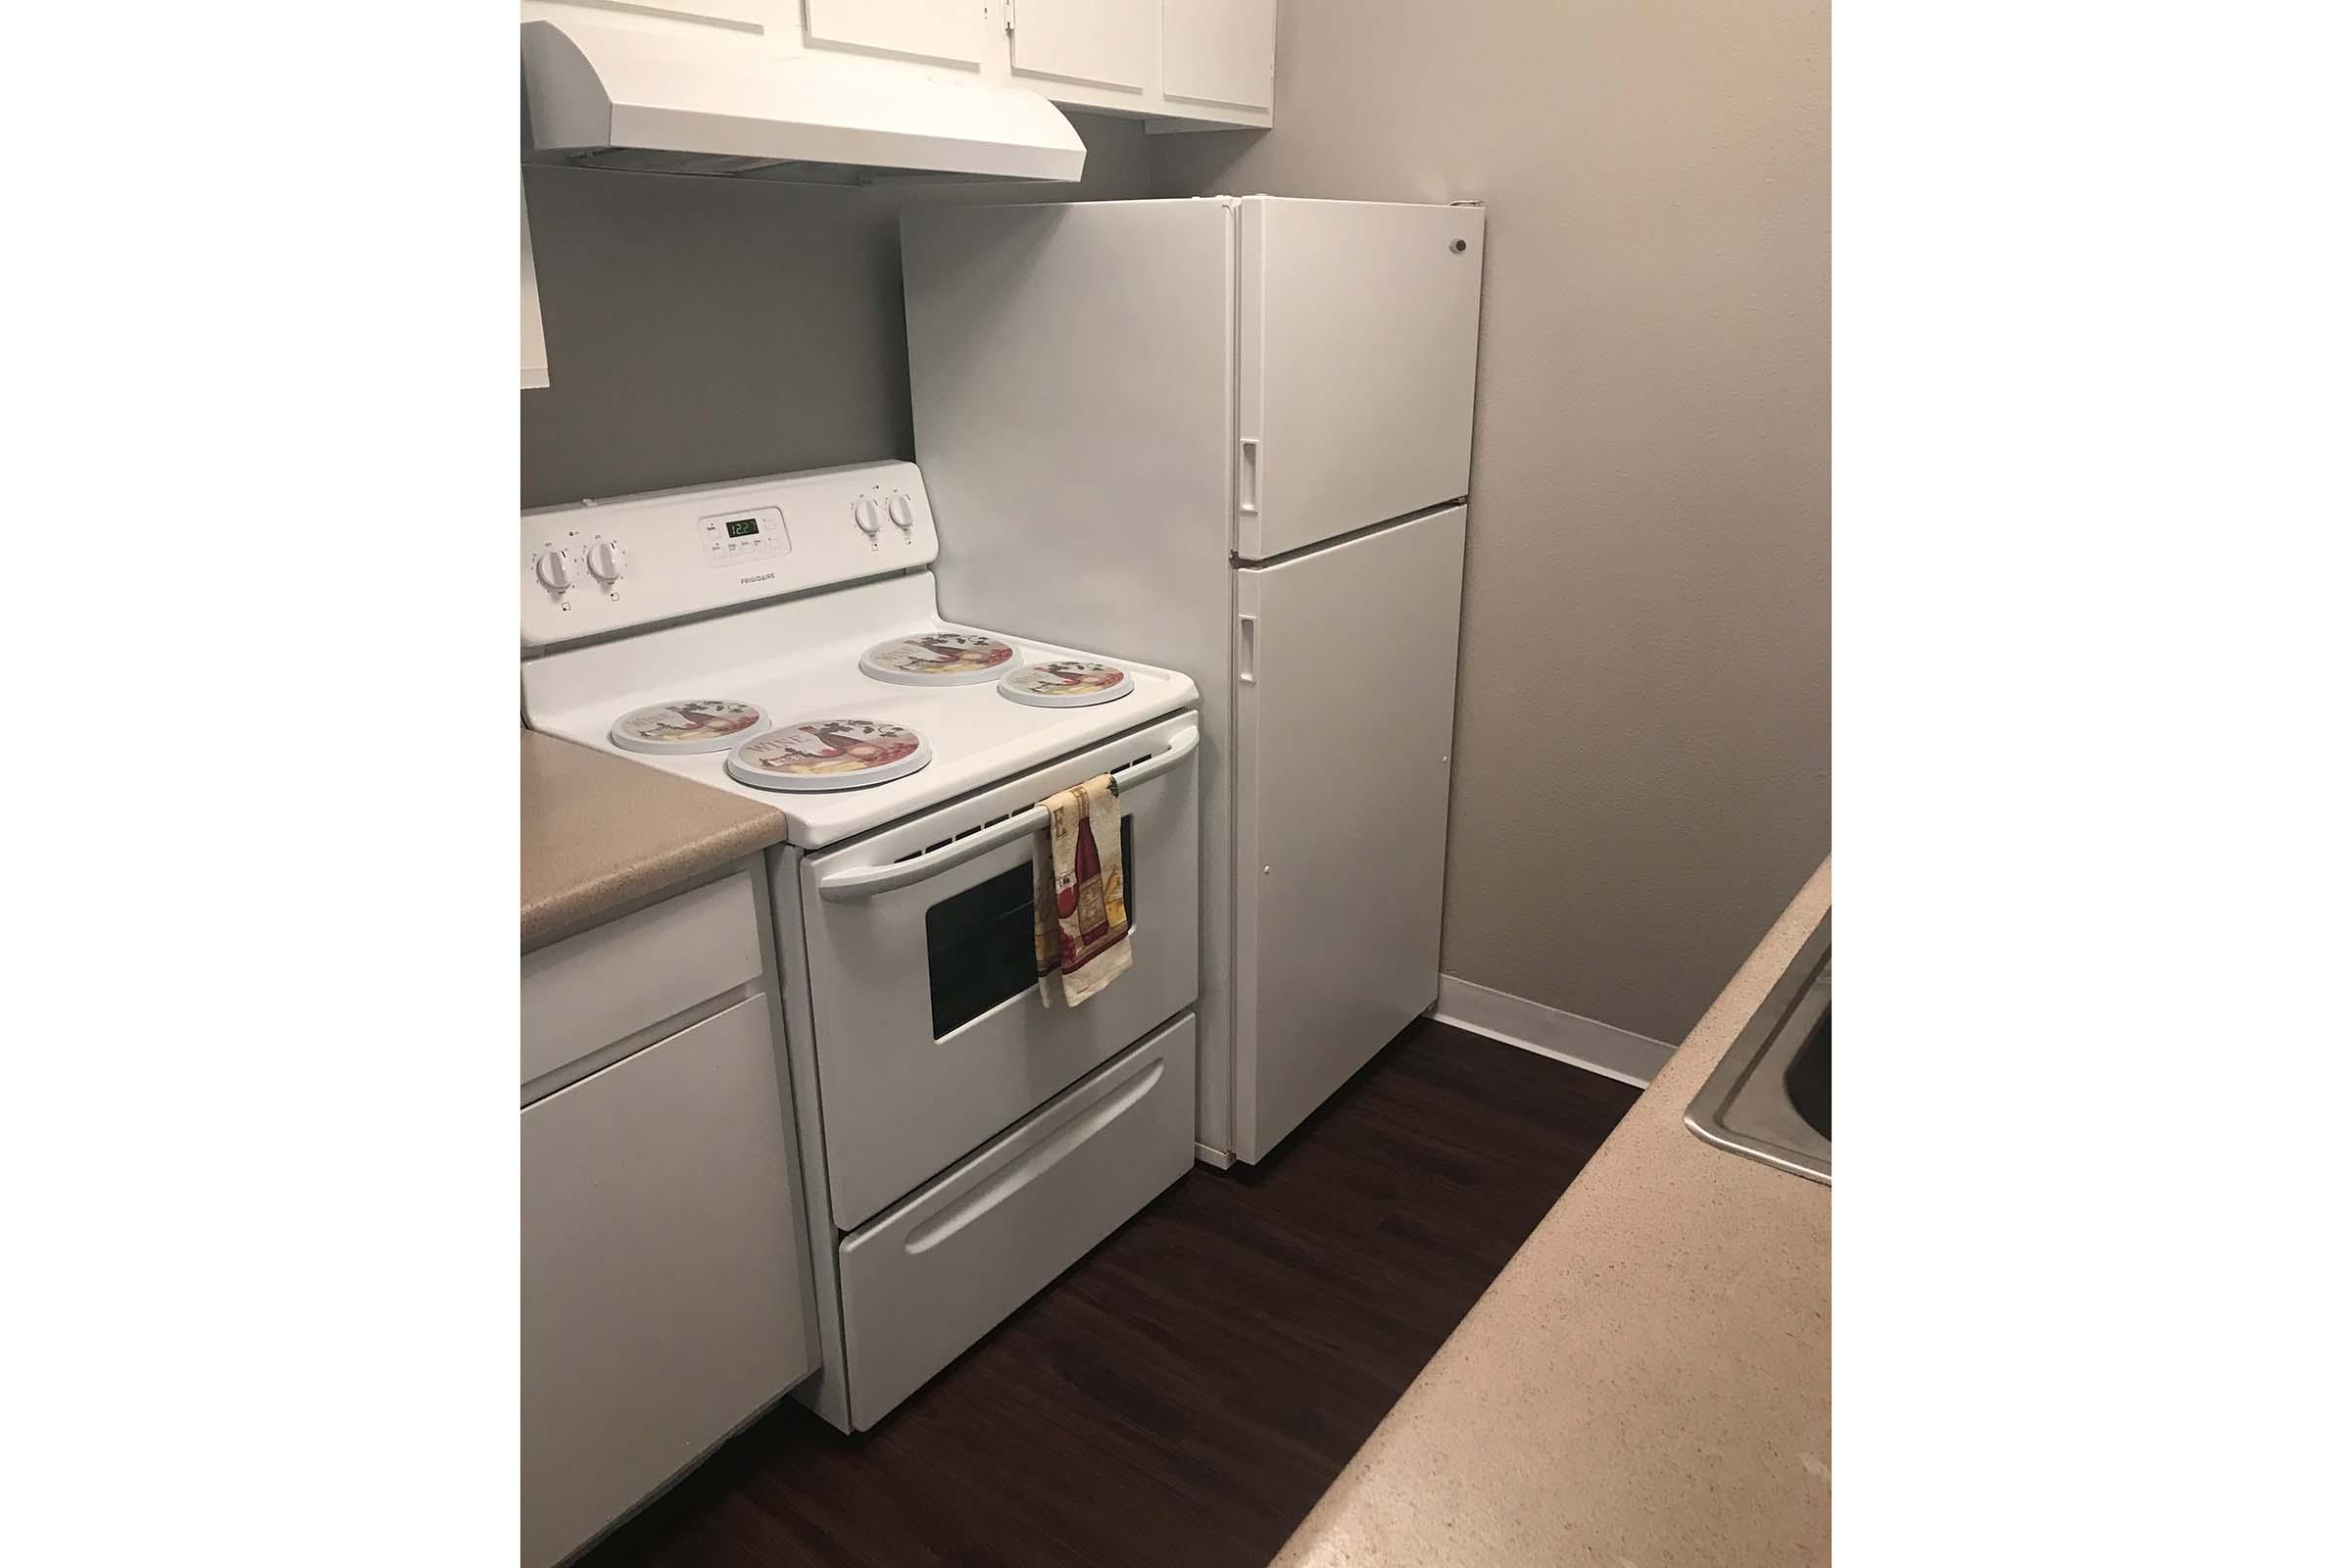 a stove top oven sitting inside of a refrigerator